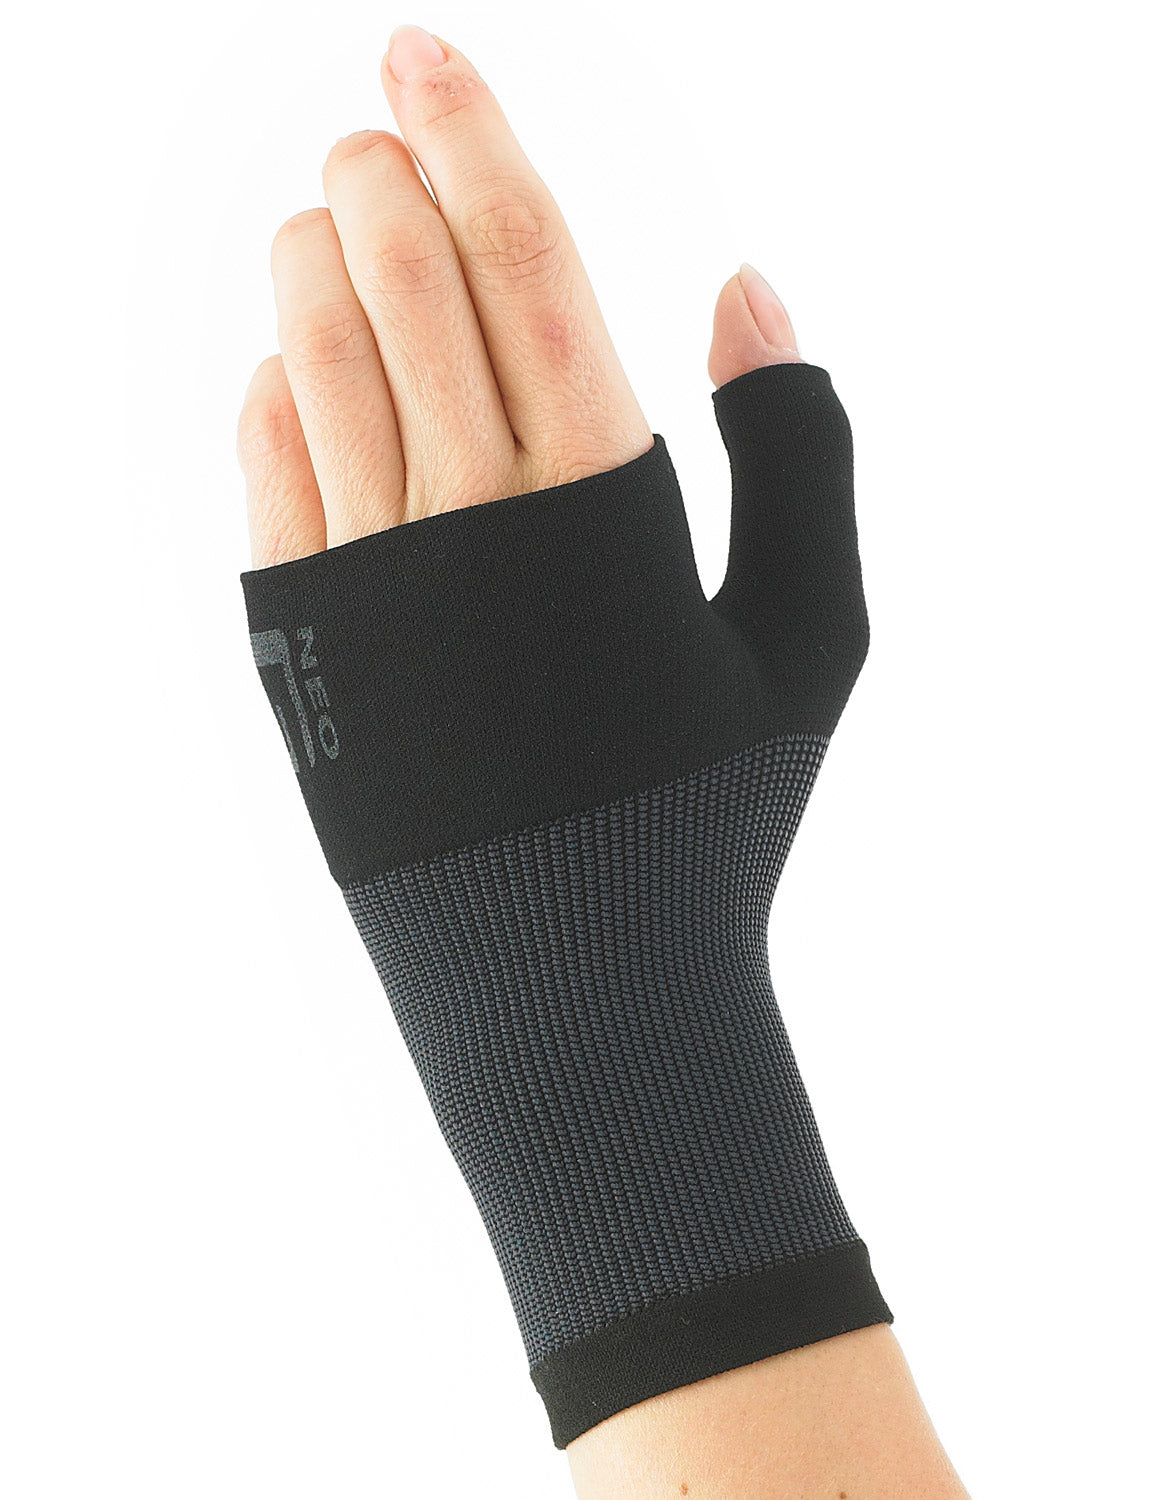 Neo G Wrist and Thumb Support